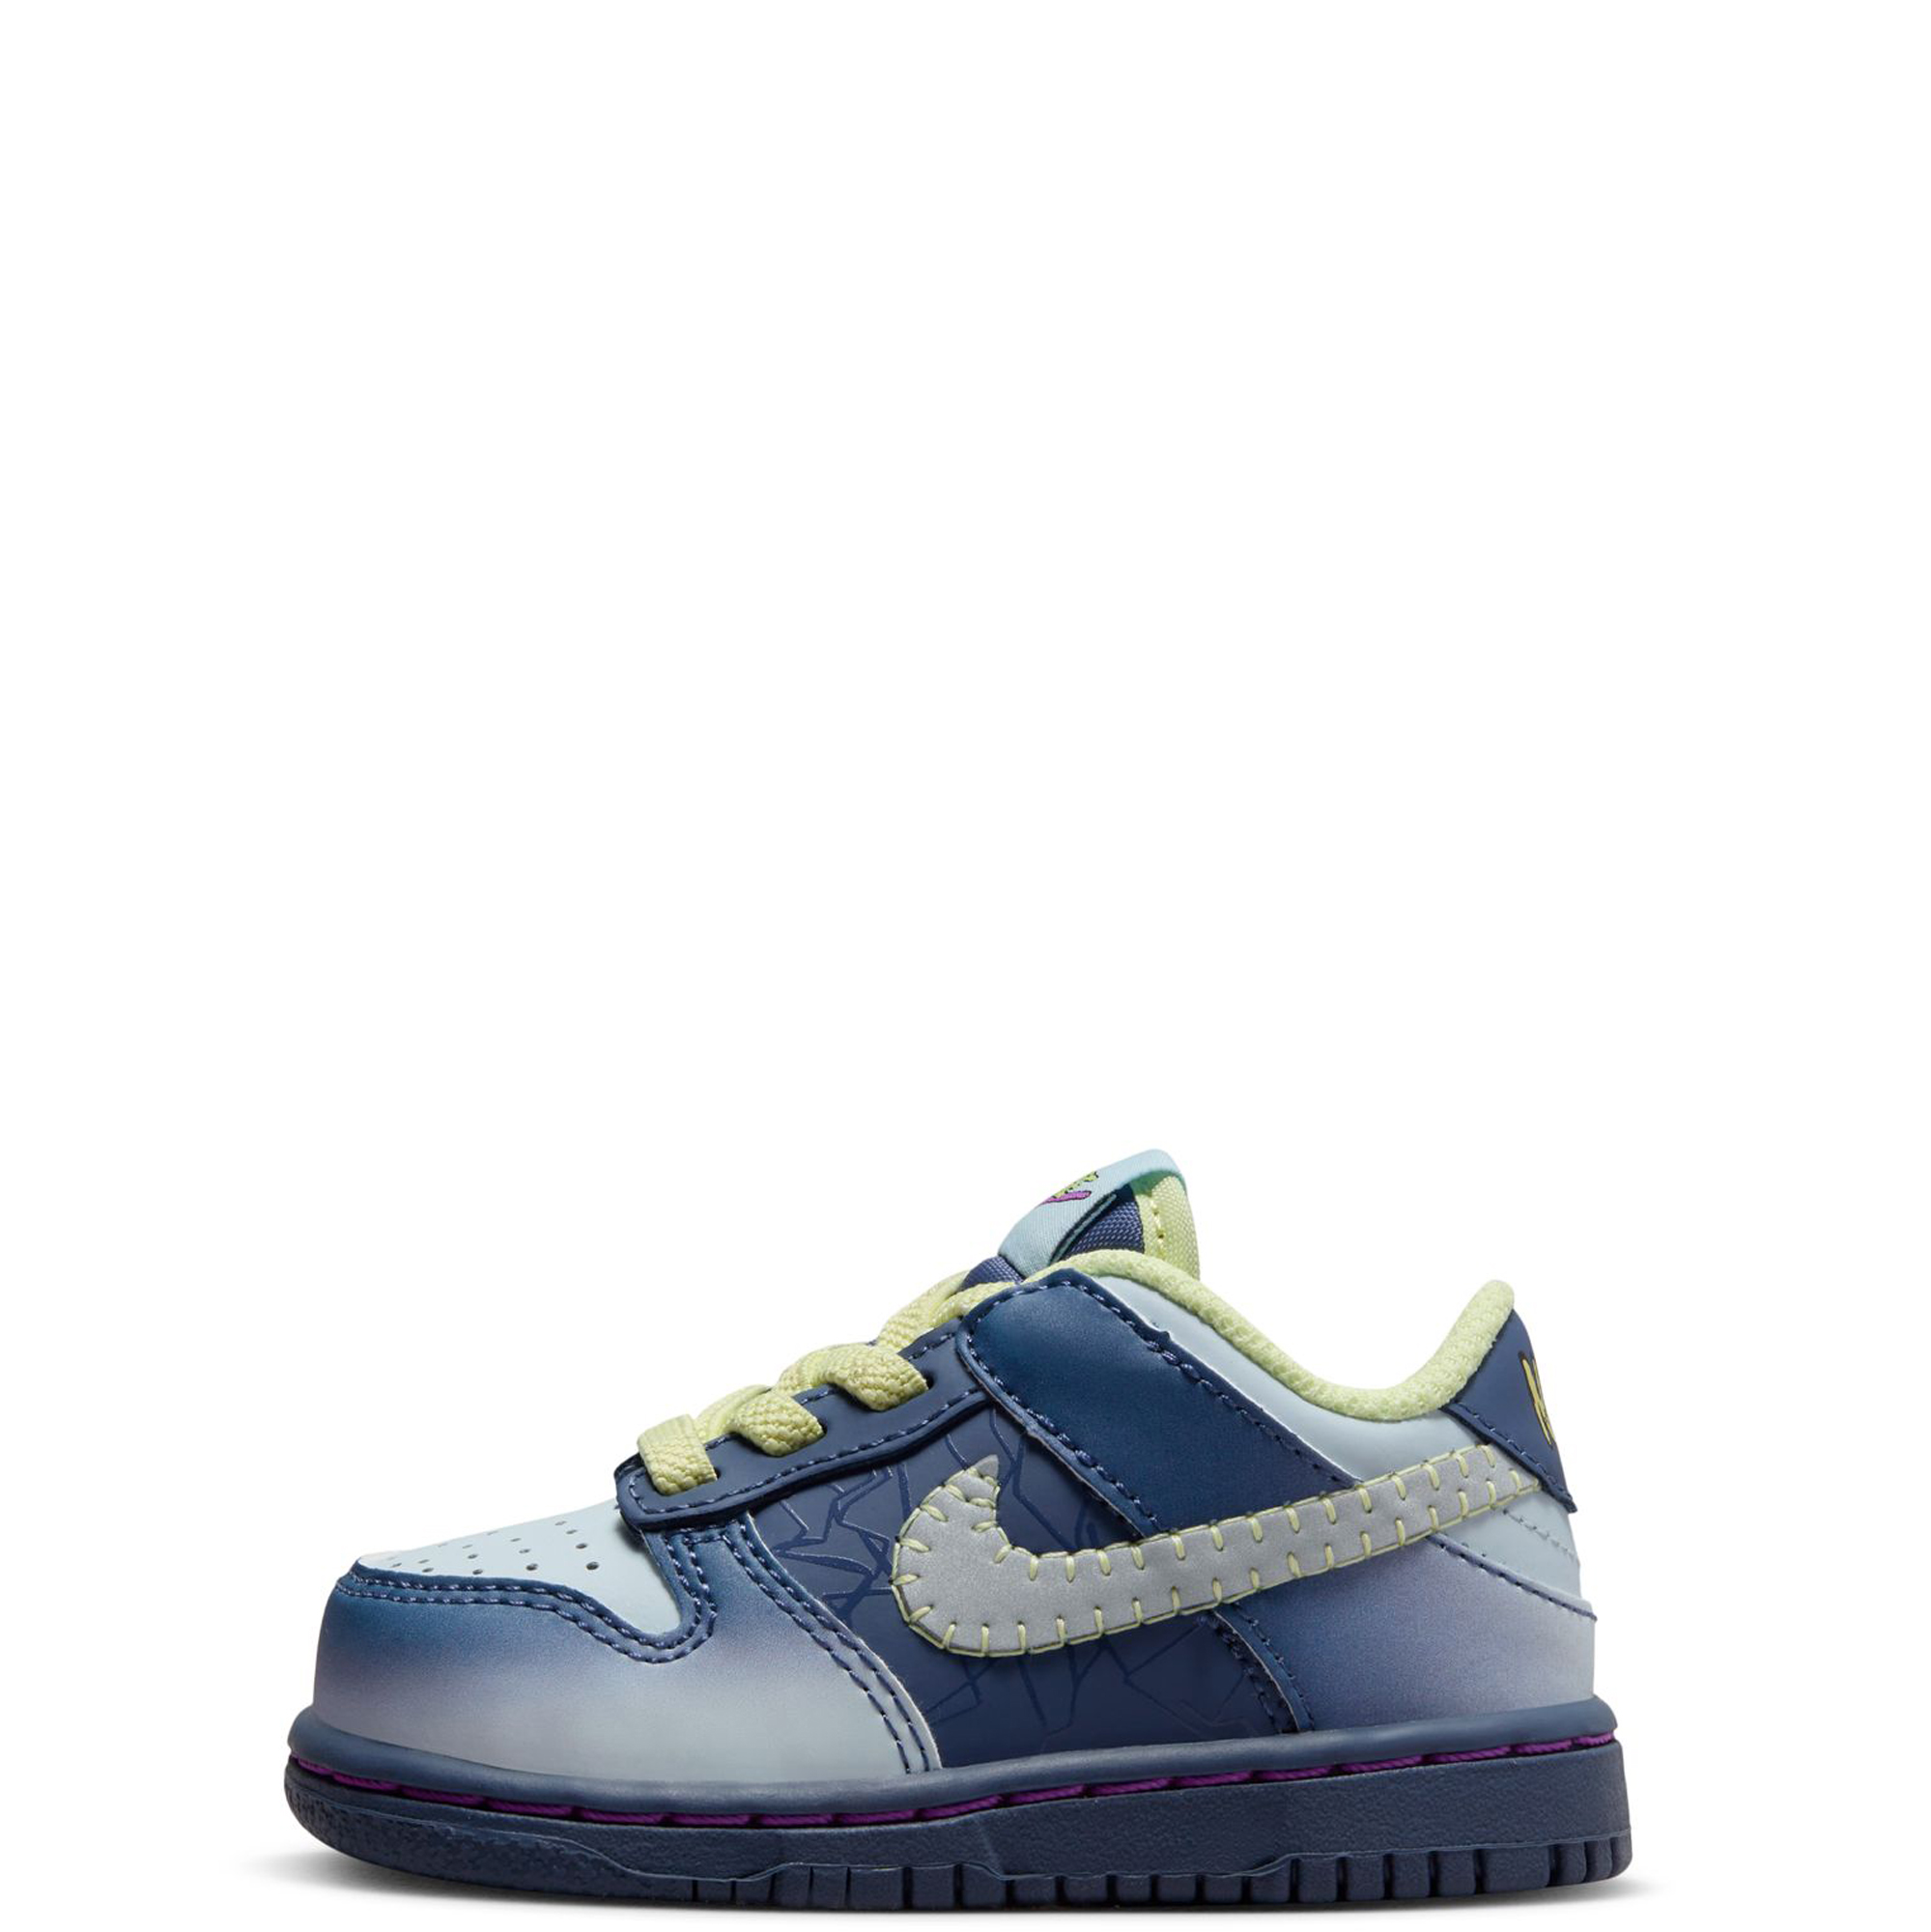 TODDLER DUNK LOW FQ8358 491